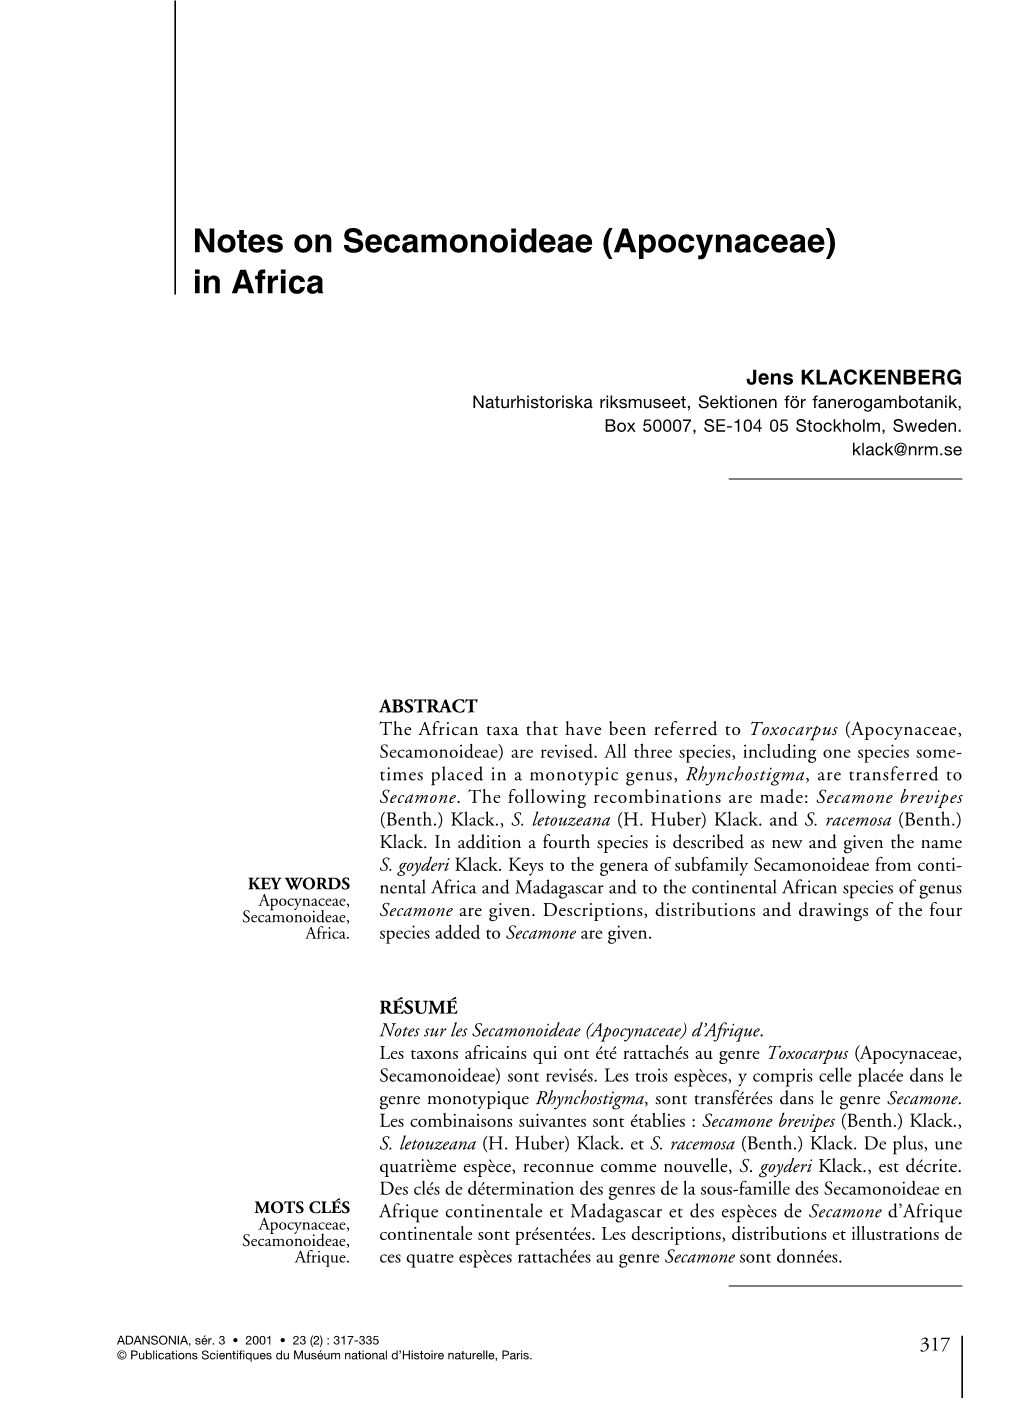 Notes on Secamonoideae (Apocynaceae) in Africa